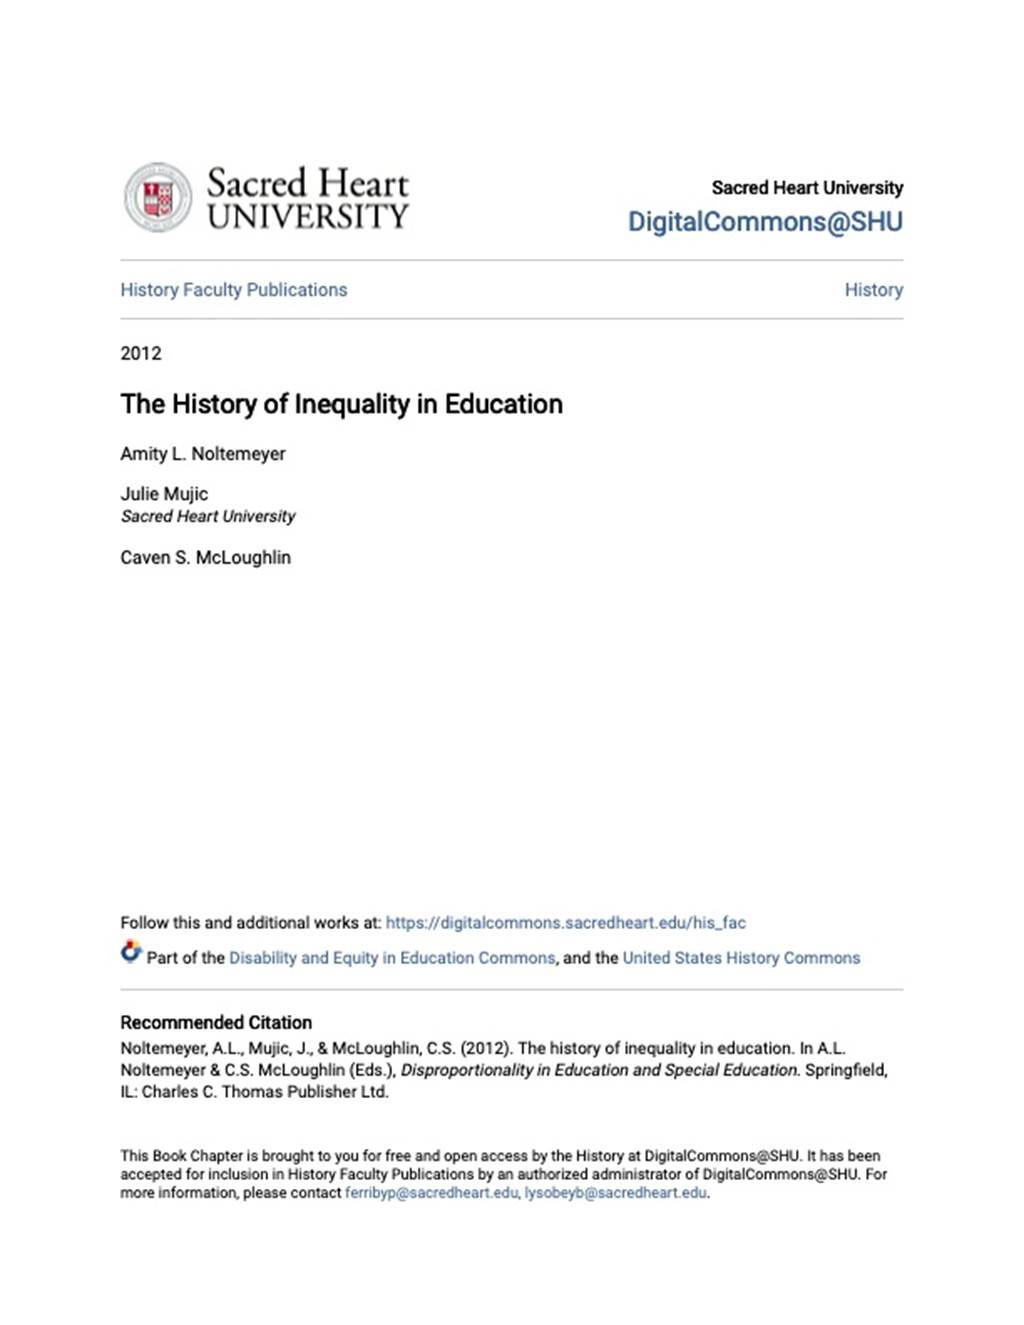 History of Inequality in Education - Document image